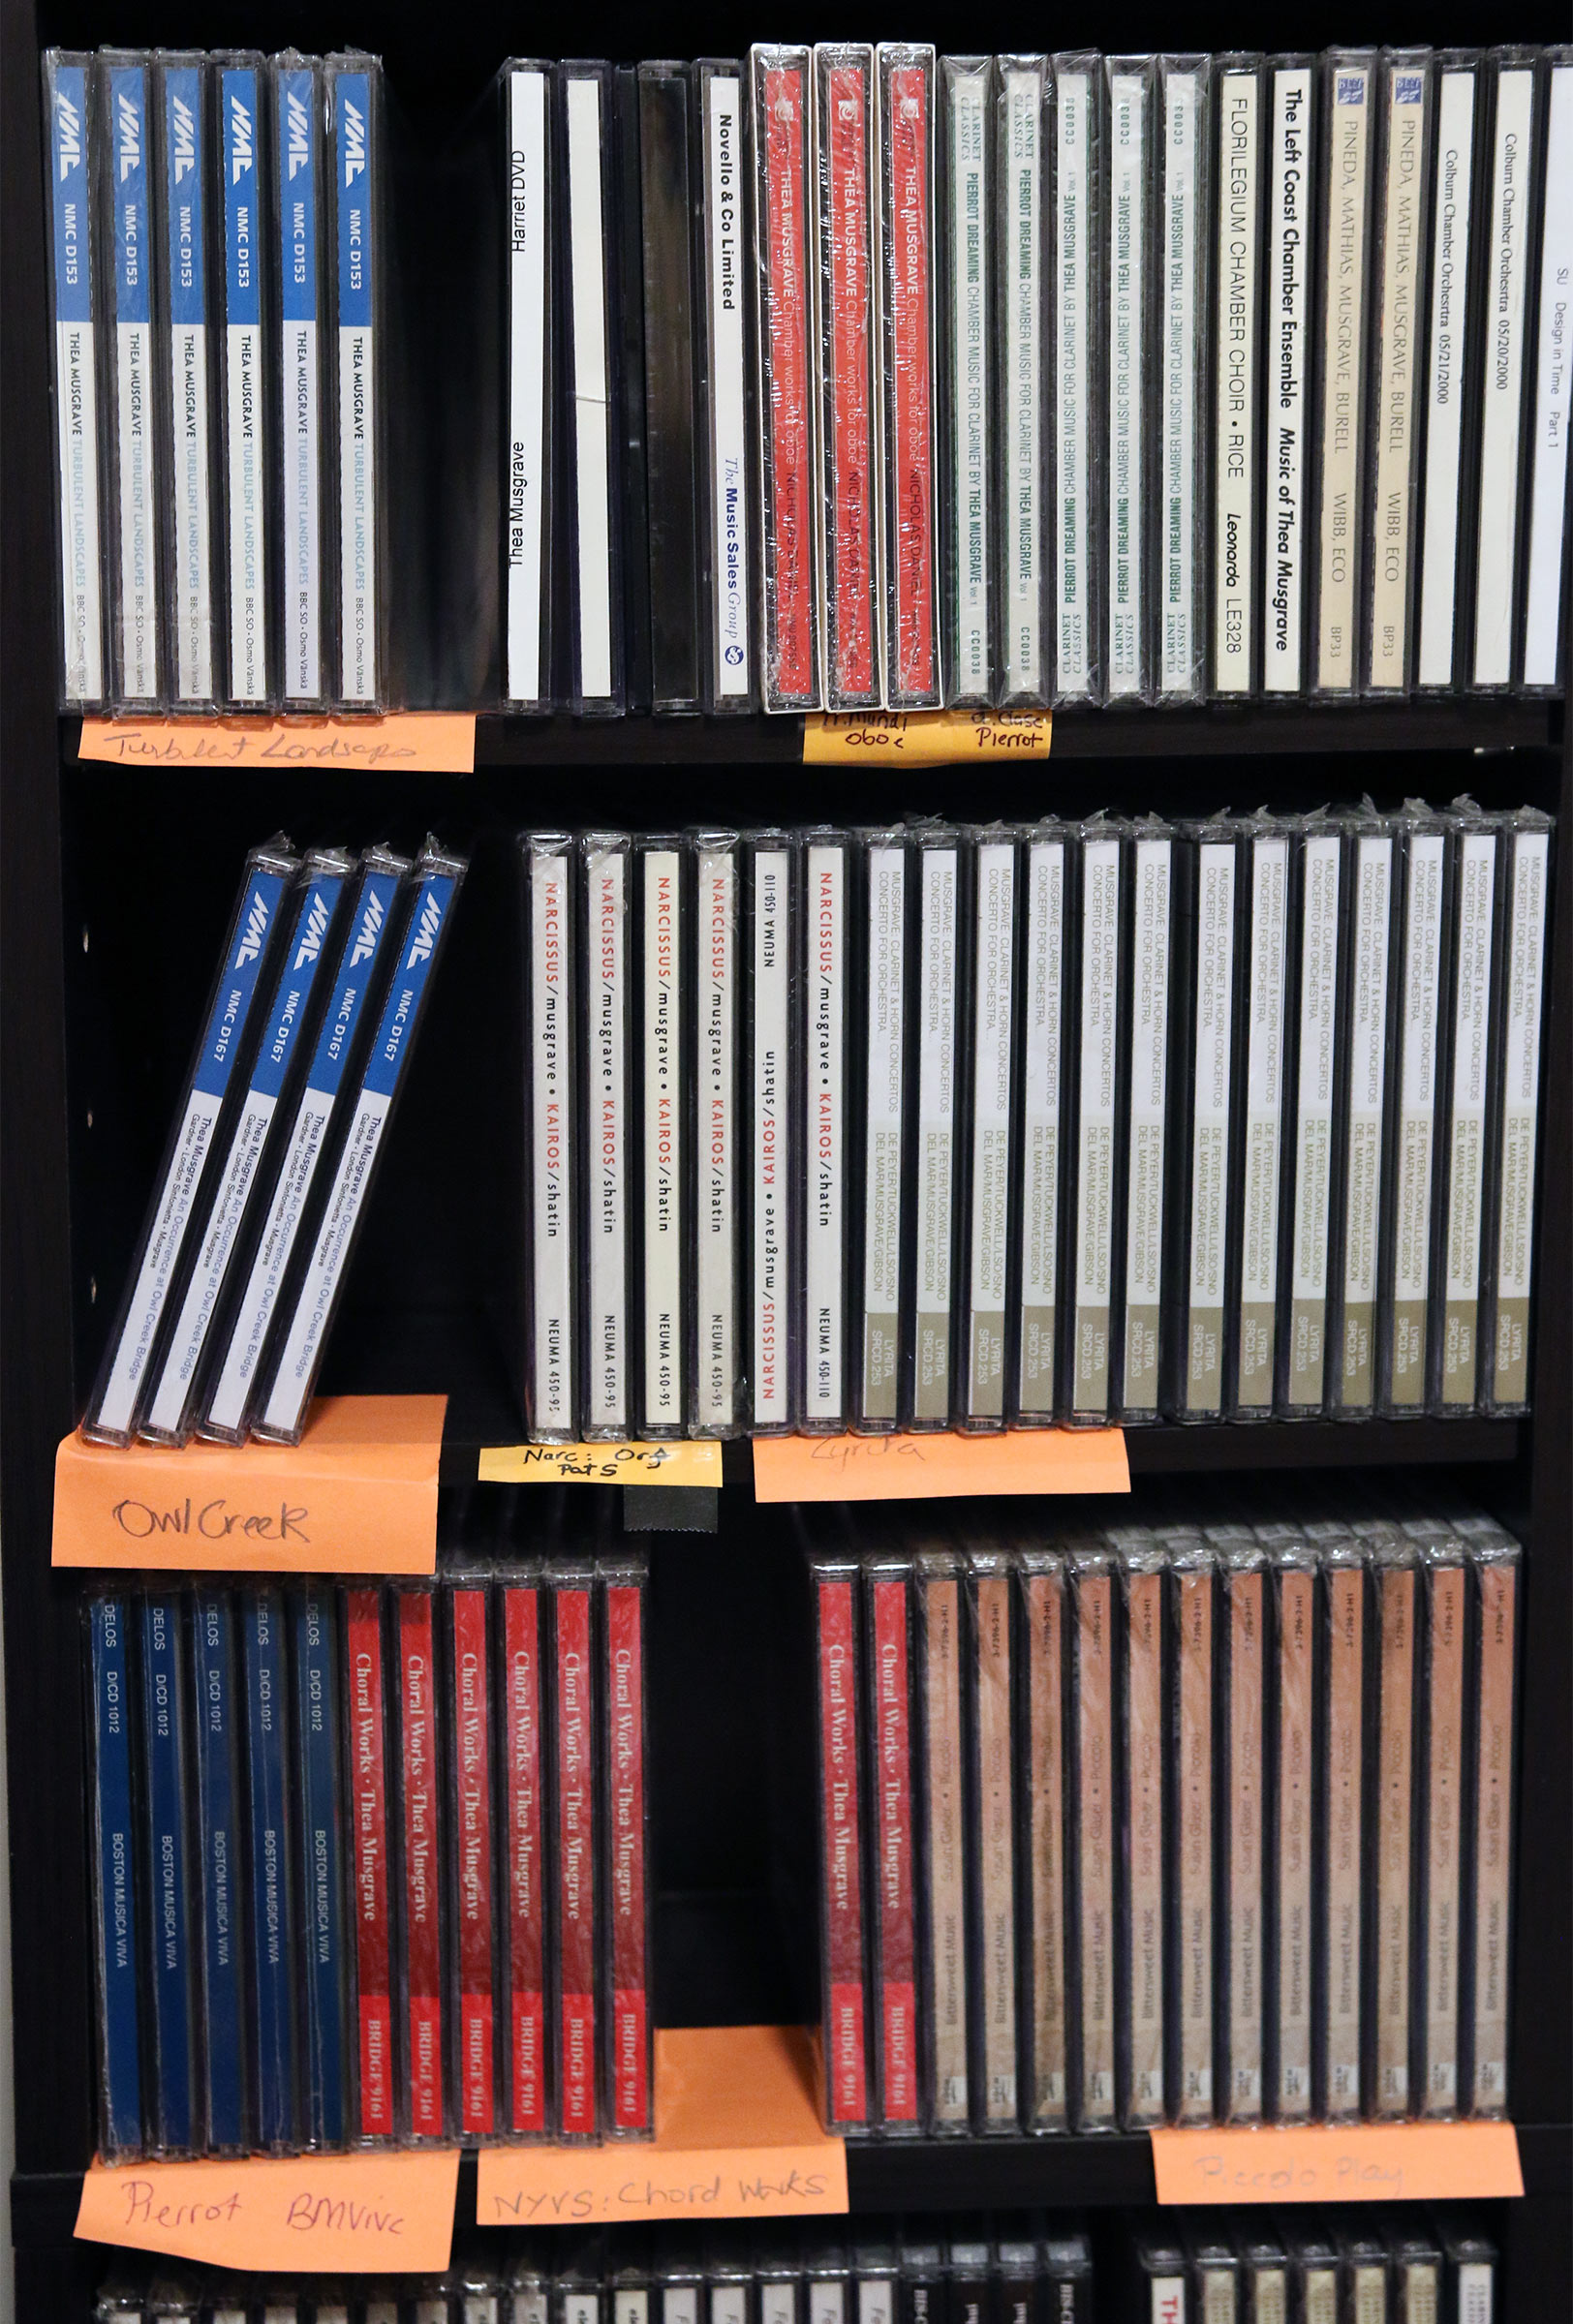 A cabinet filled with CD recordings of Thea Musgrave's music.